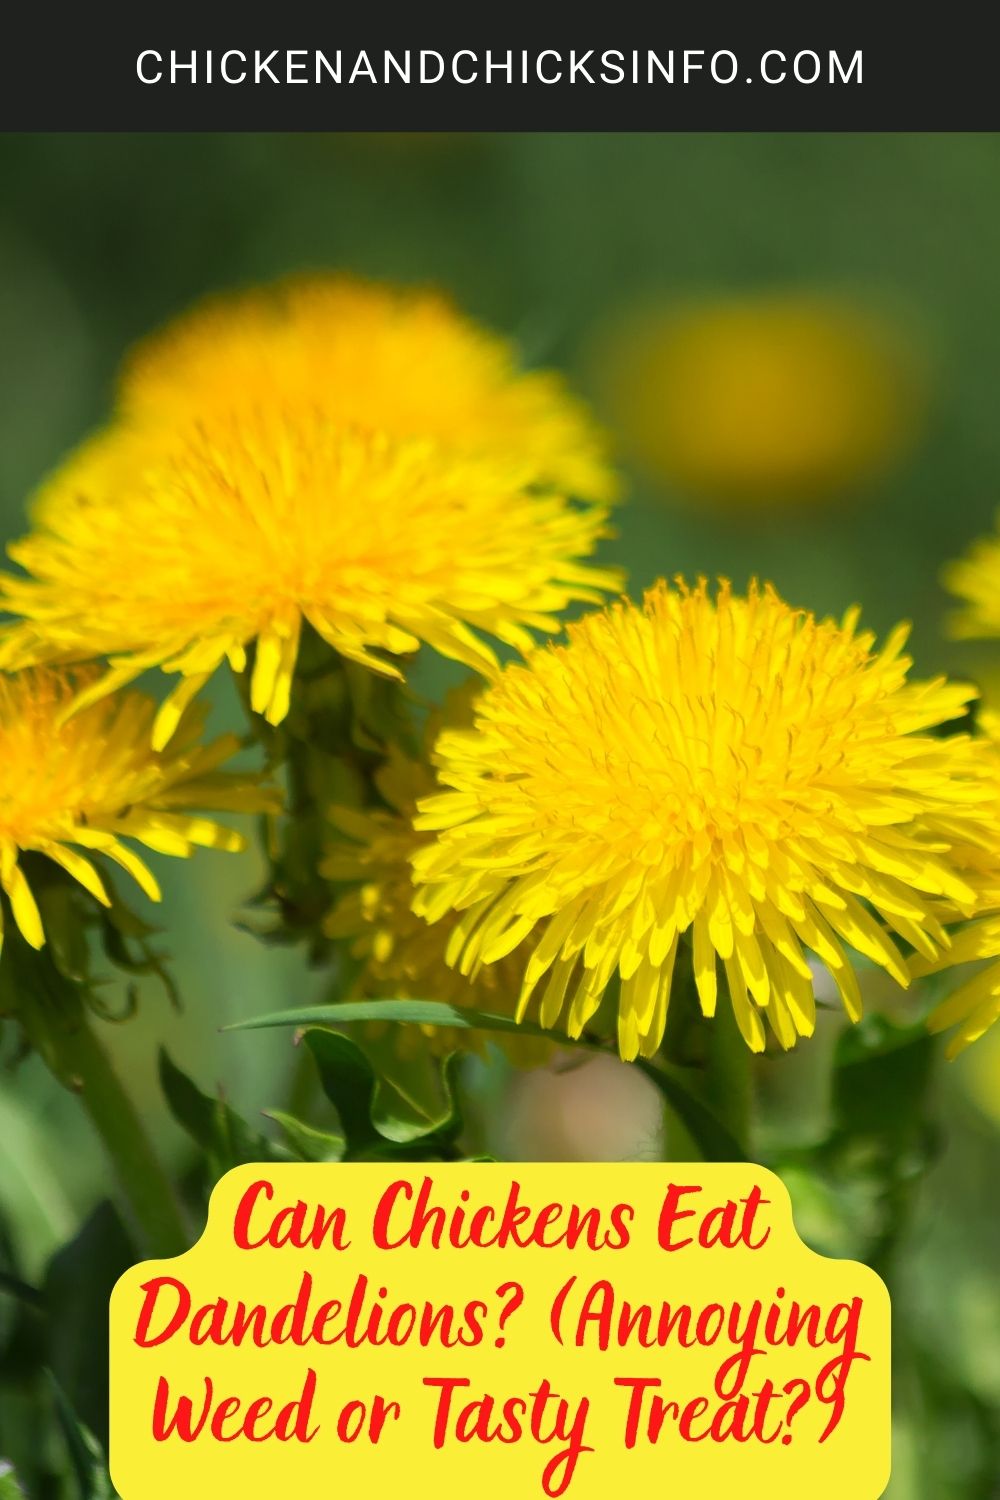 Can Chickens Eat Dandelions? (Annoying Weed or Tasty Treat?) poster.
